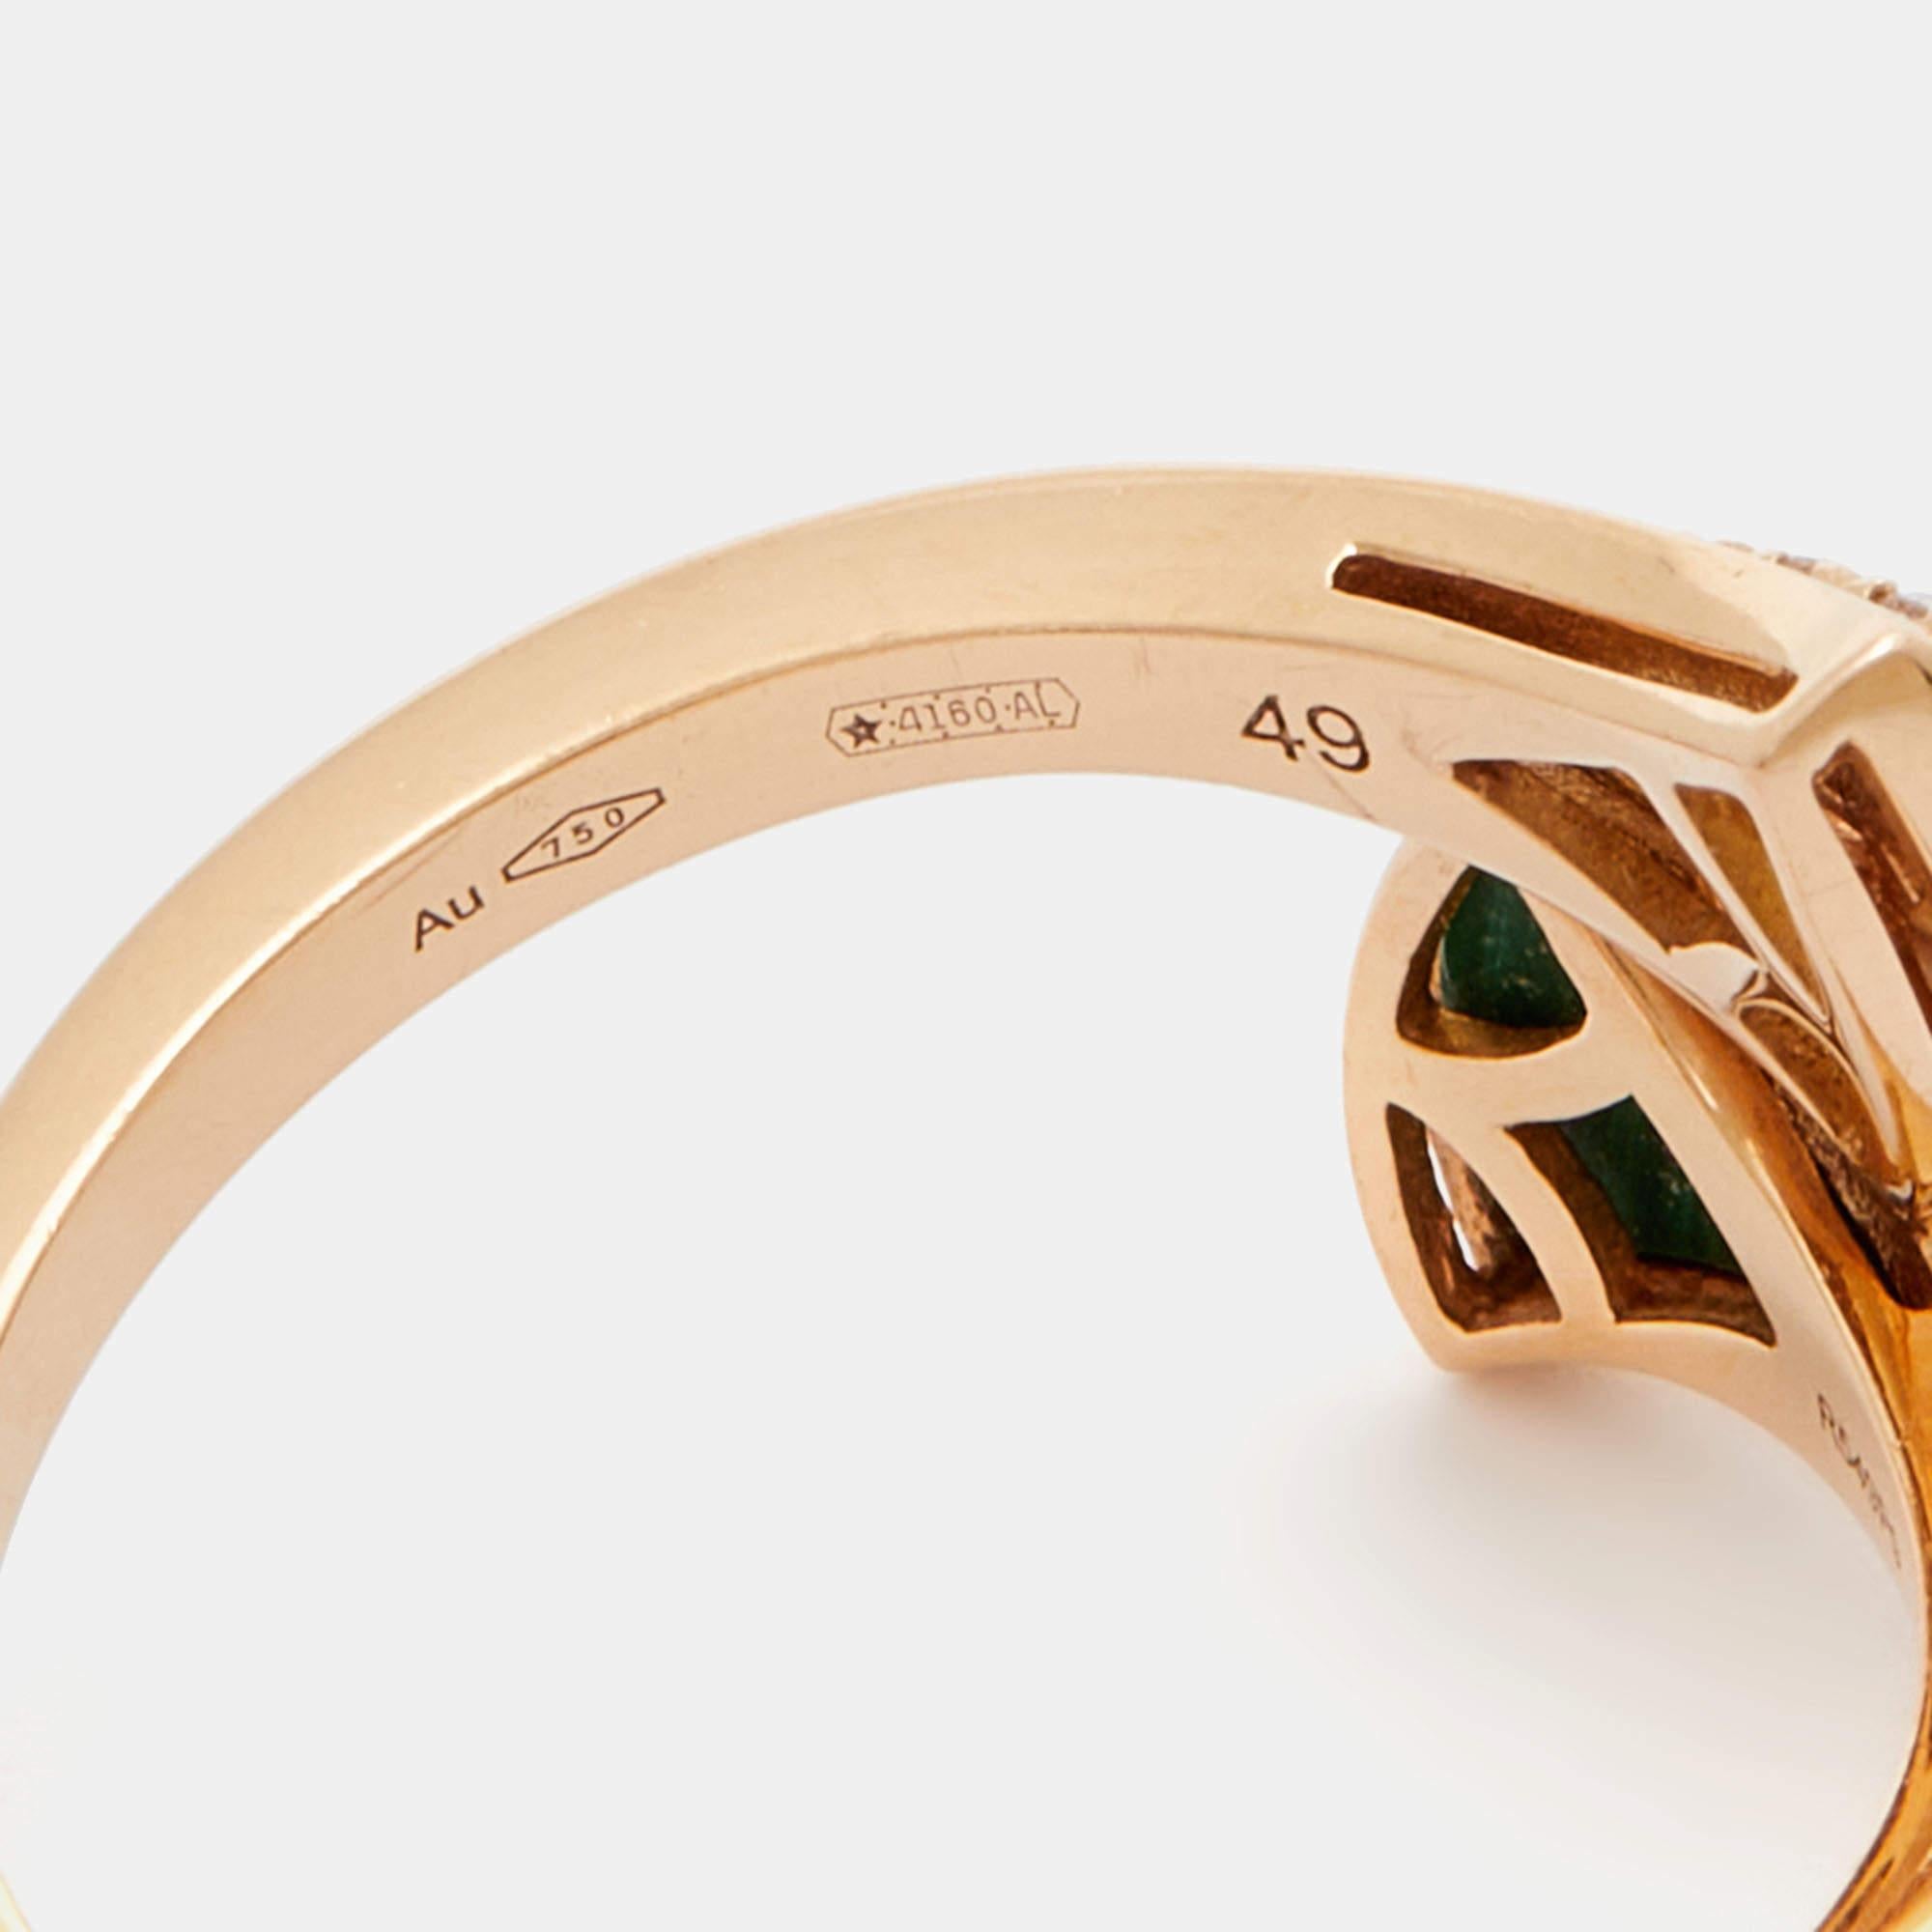 Beautiful praise to the Maison's rich aesthetics, this wondrous ring is simple yet statement-making. It is a gorgeous piece of jewelry that can be worn for any occasion.

Includes: Original Box, Original Case